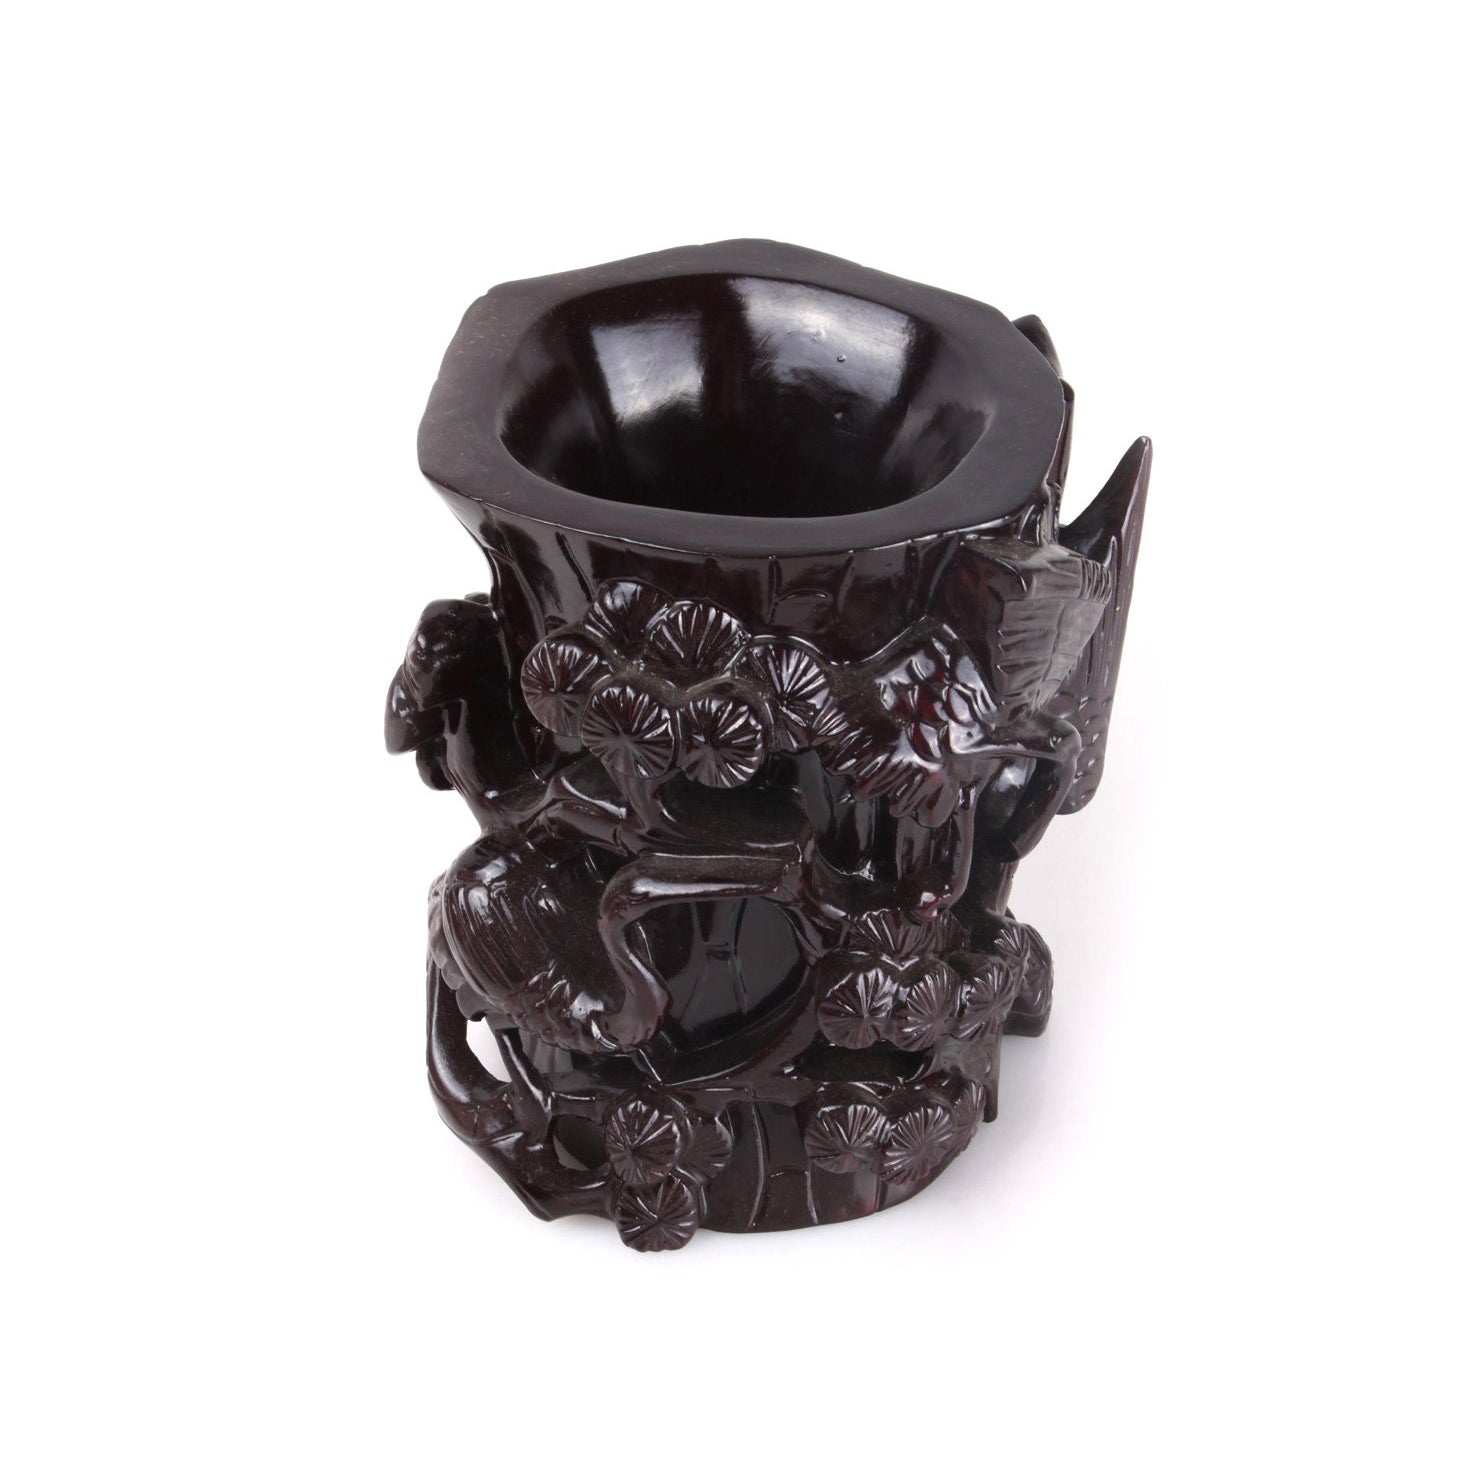 black wooden brush holder whose surface is delicately carved into cranes that are dancing on the lotus